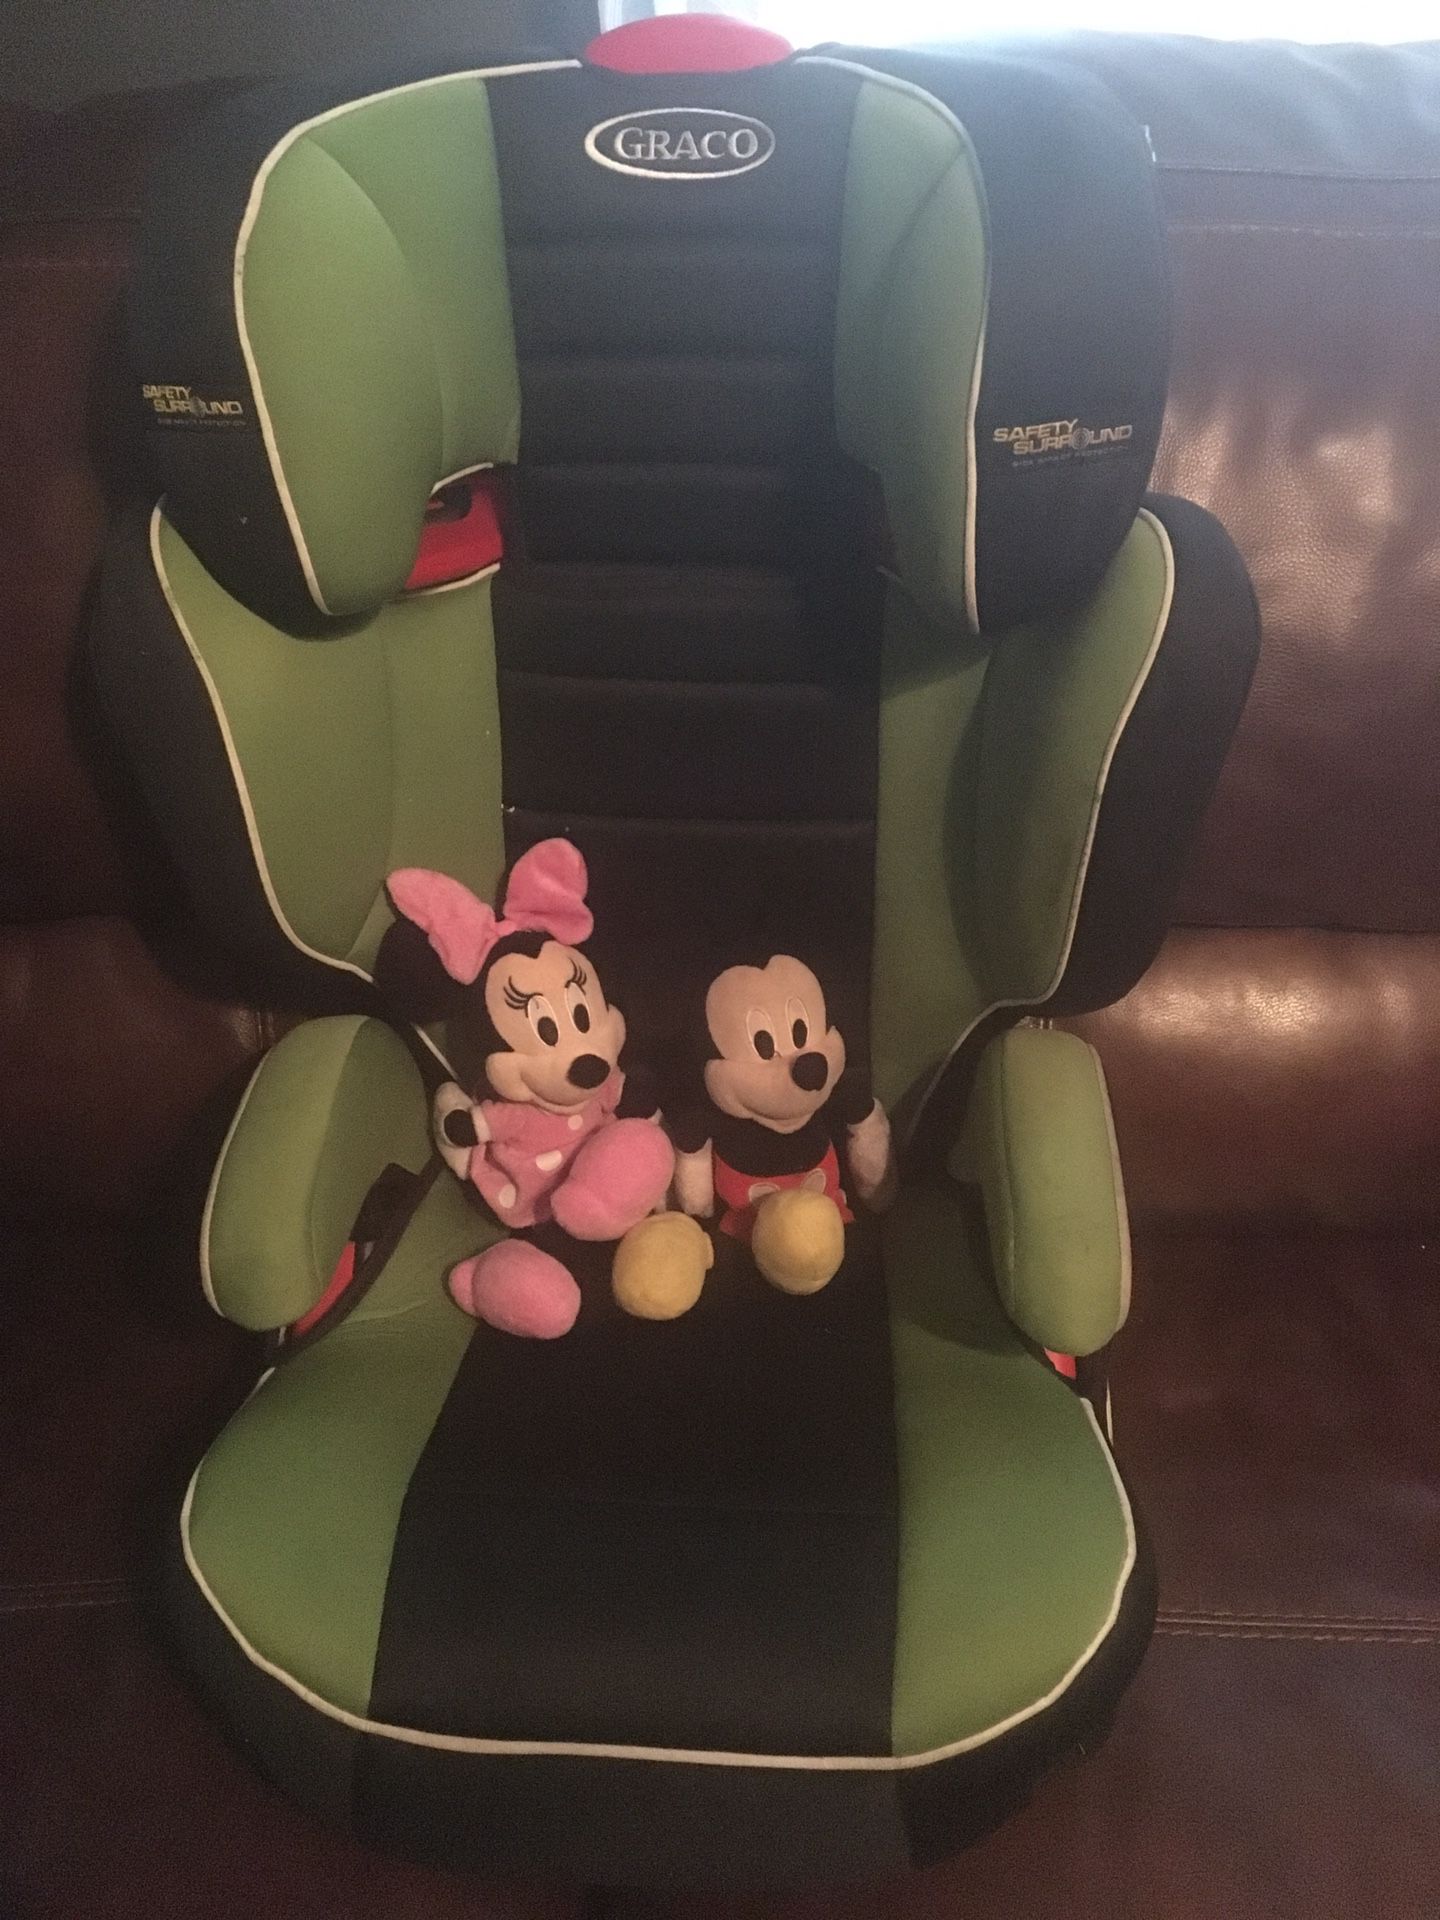 GRACO booster car seat